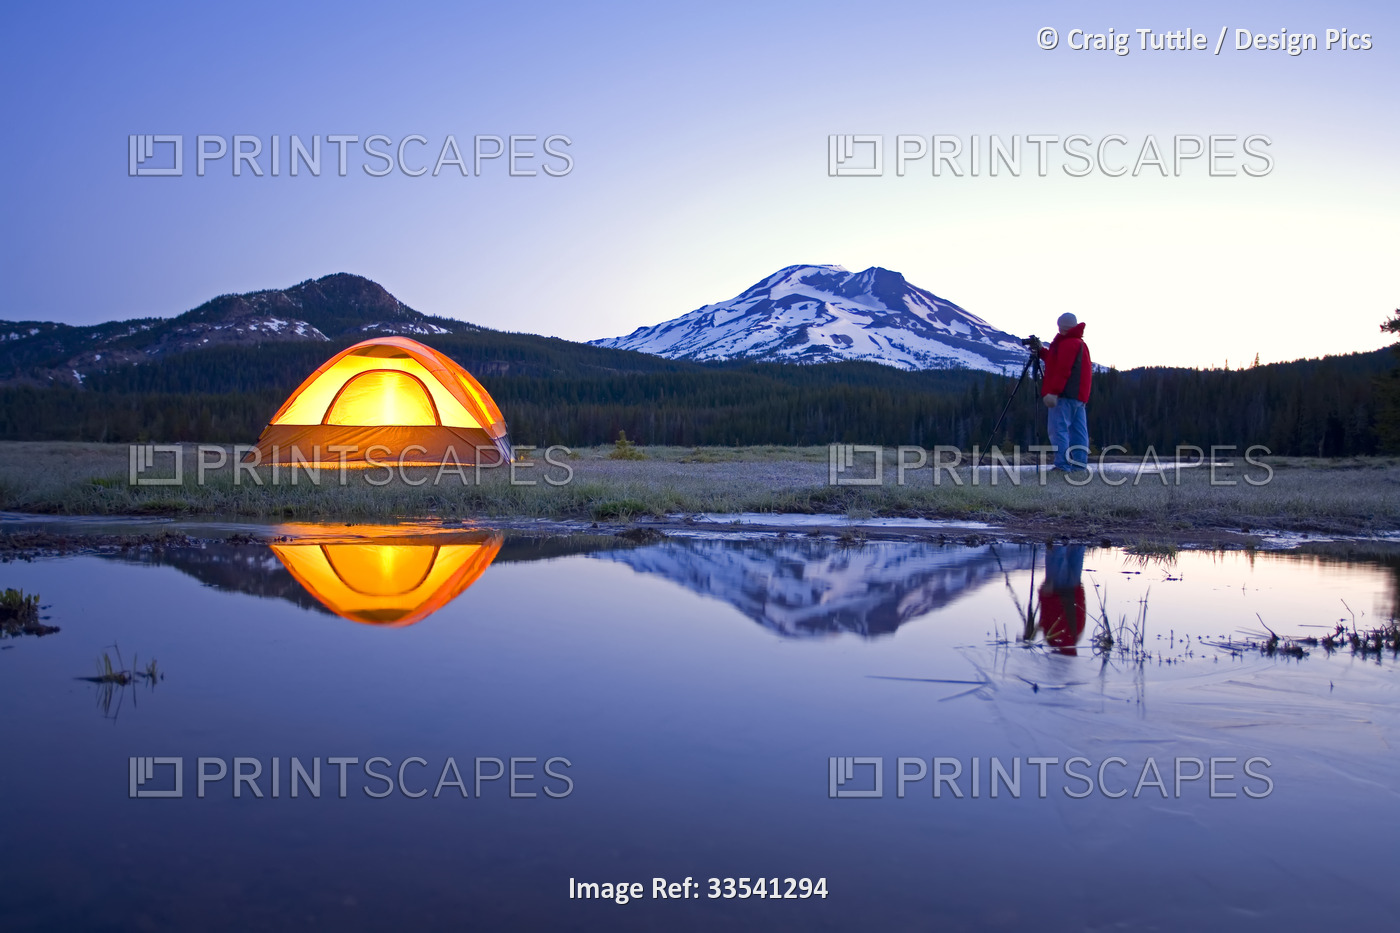 Man with a camera and tripod photographing Oregon beauty at sunrise next to ...